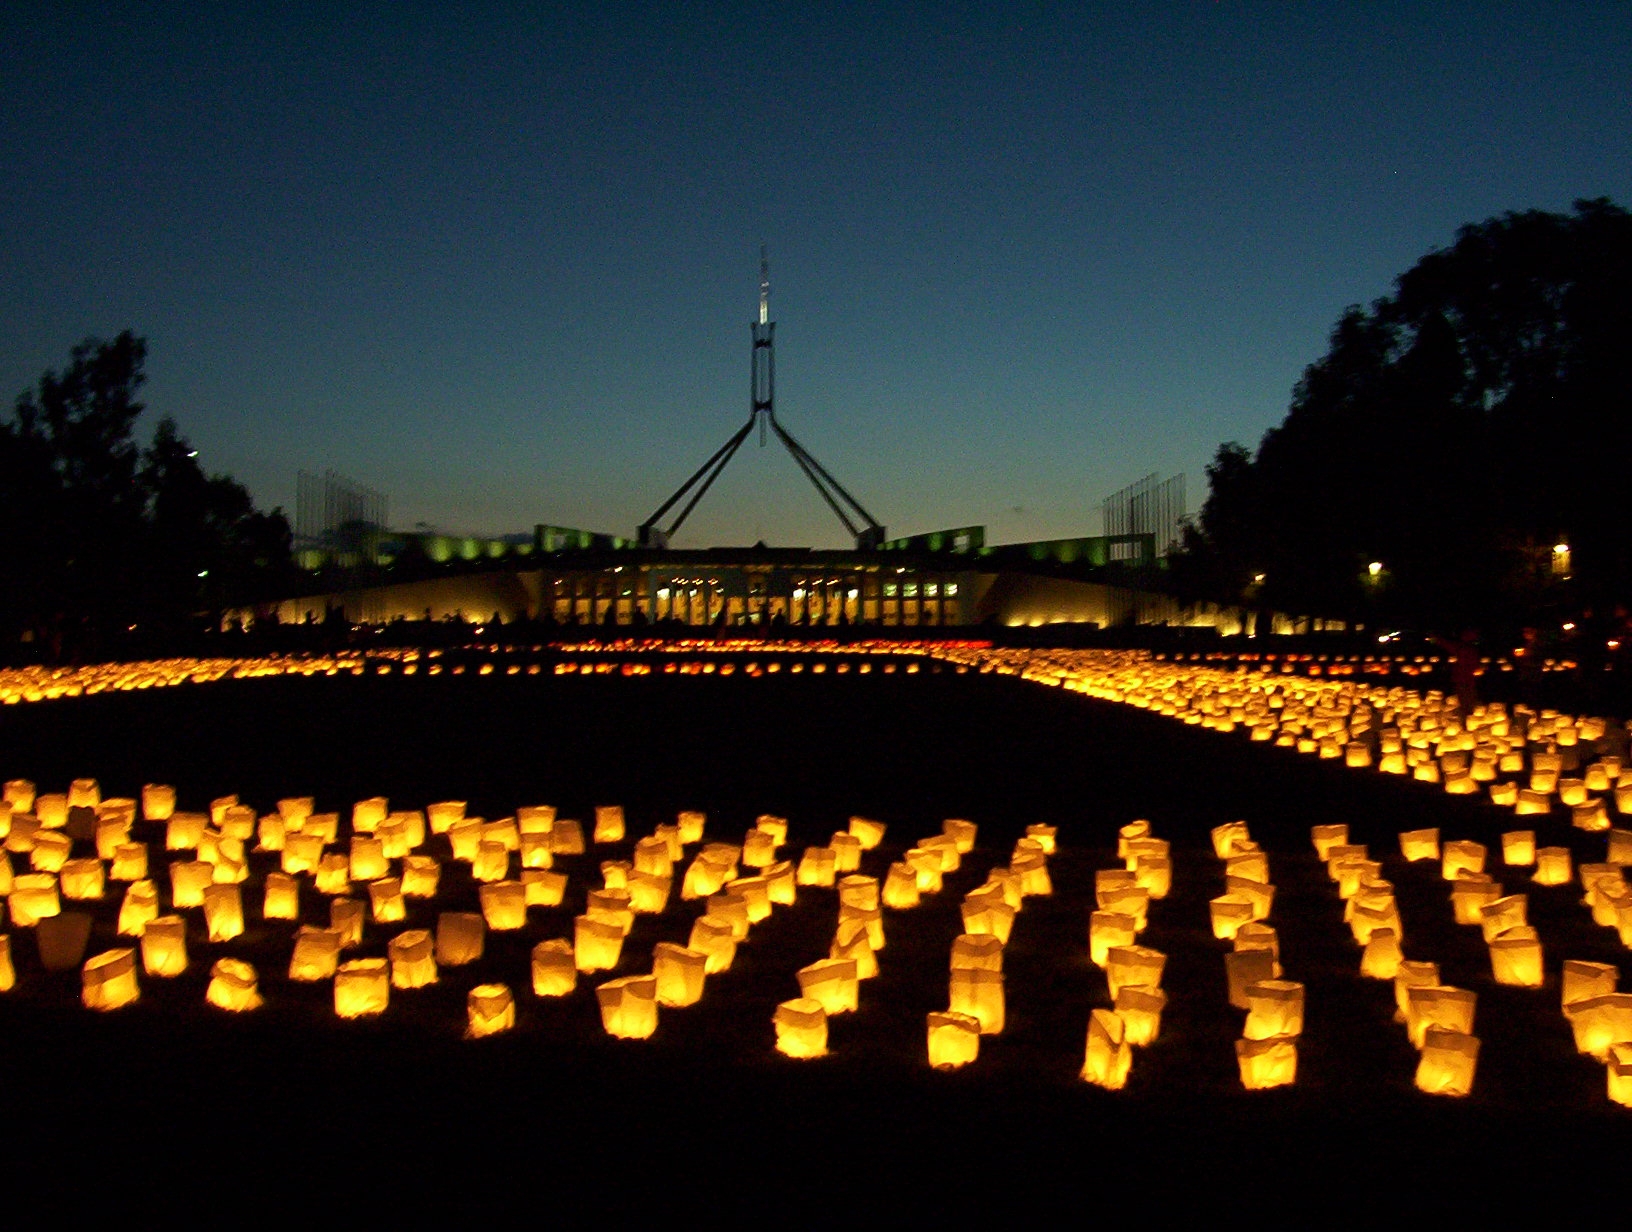 3000 candles in front of Parliament House, Canberra